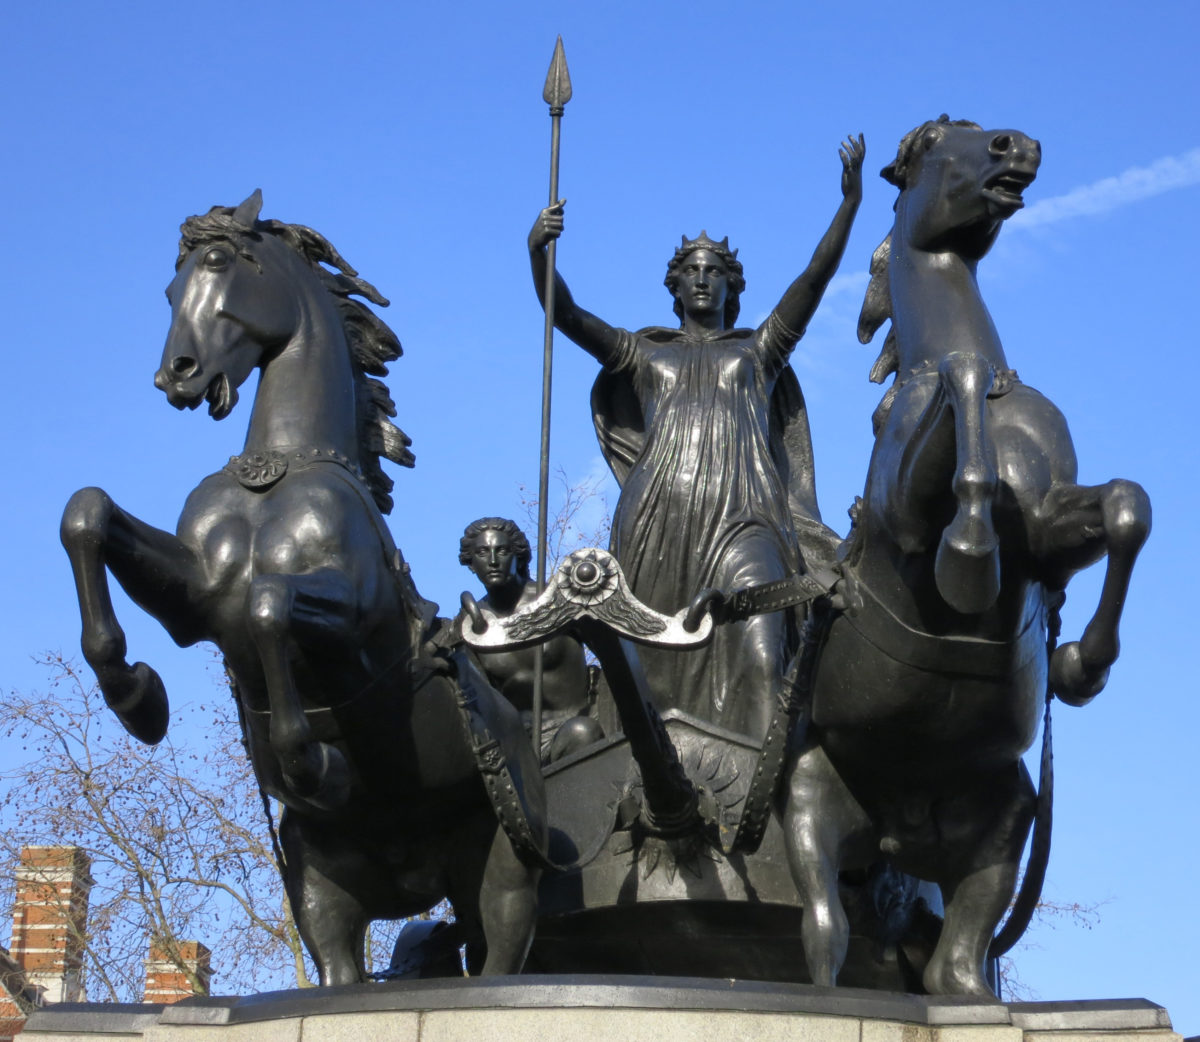 “Boadicea and Her Daughters” (1856-1883), sculptural group by Thomas Thornycroft. Westminster Bridge, London.